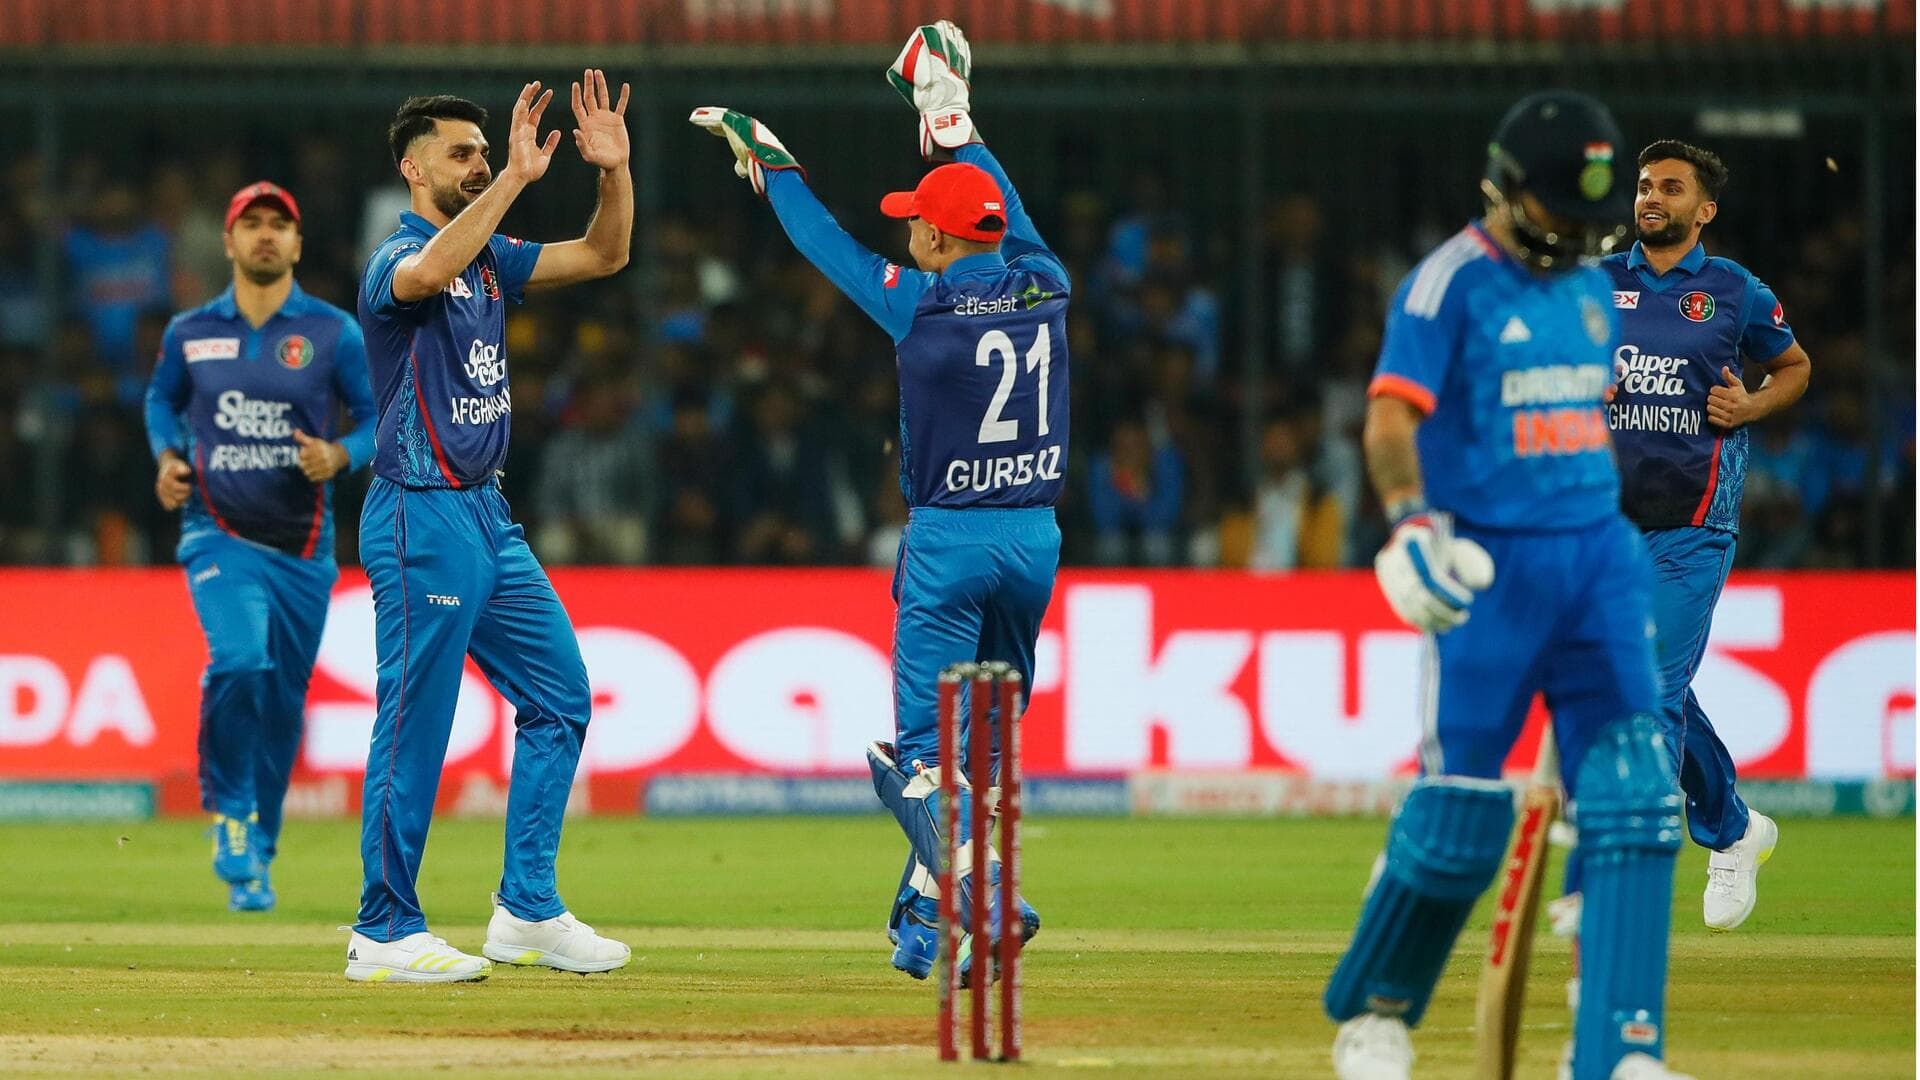 India vs Afghanistan, 3rd T20I: Visitors aim to salvage pride